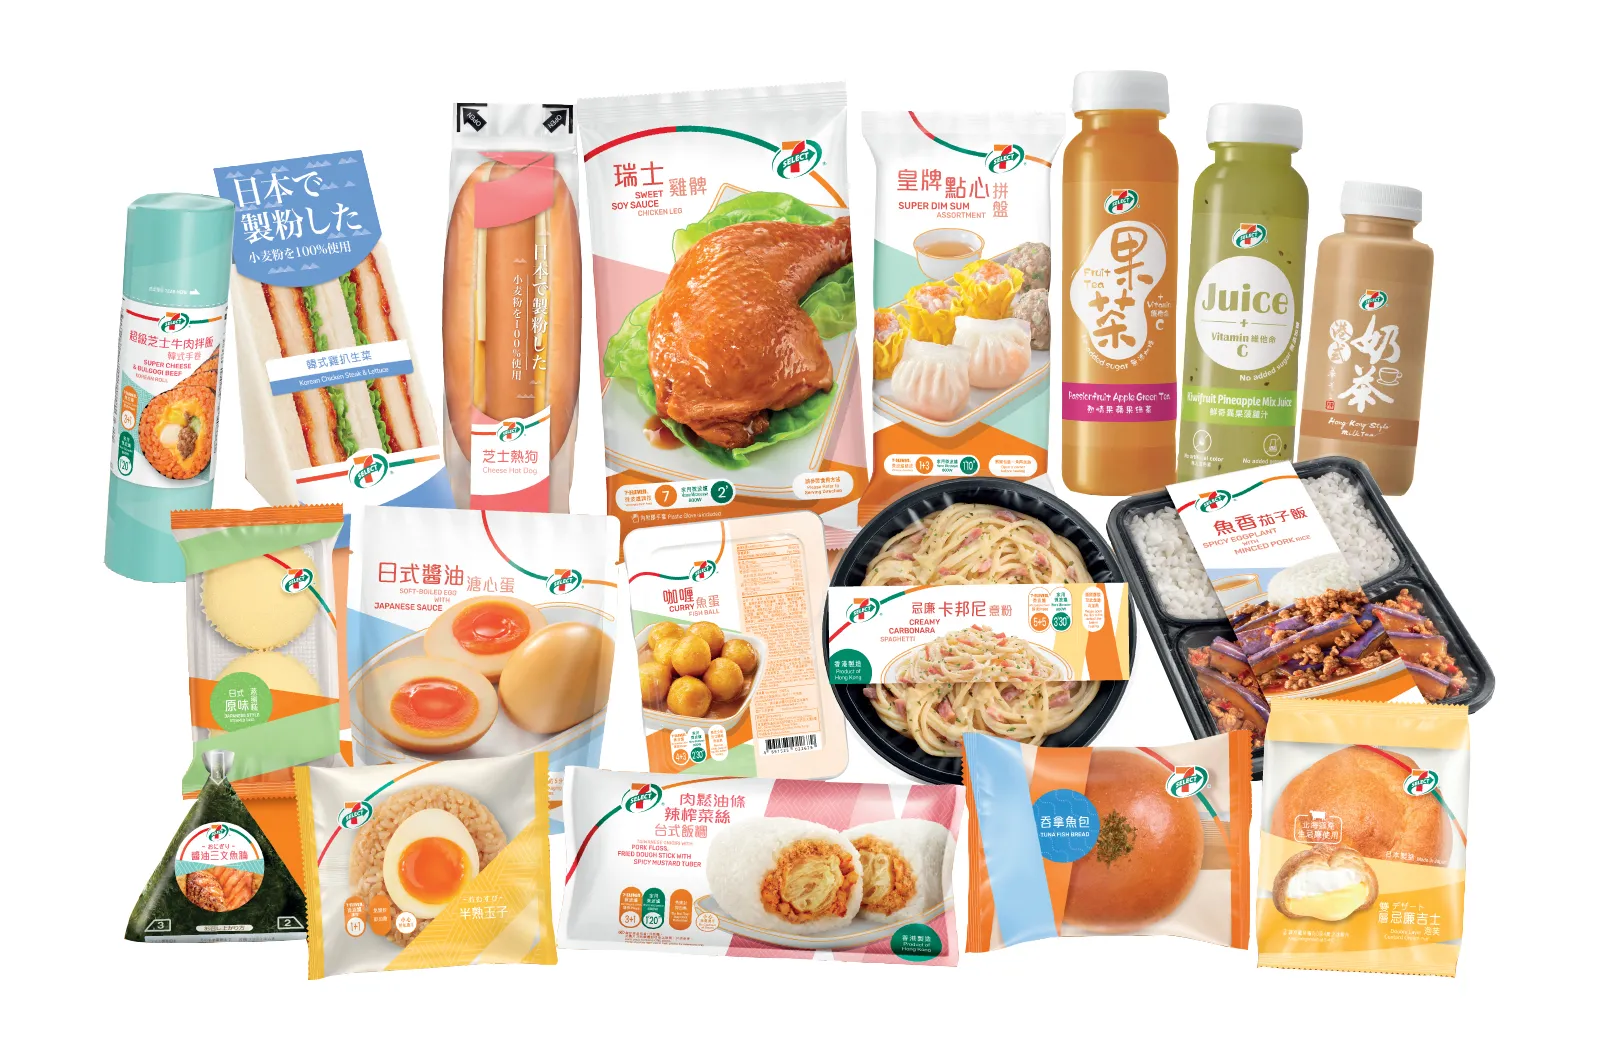 7-SELECT ready-to-eat products from 7-Eleven Hong Kong